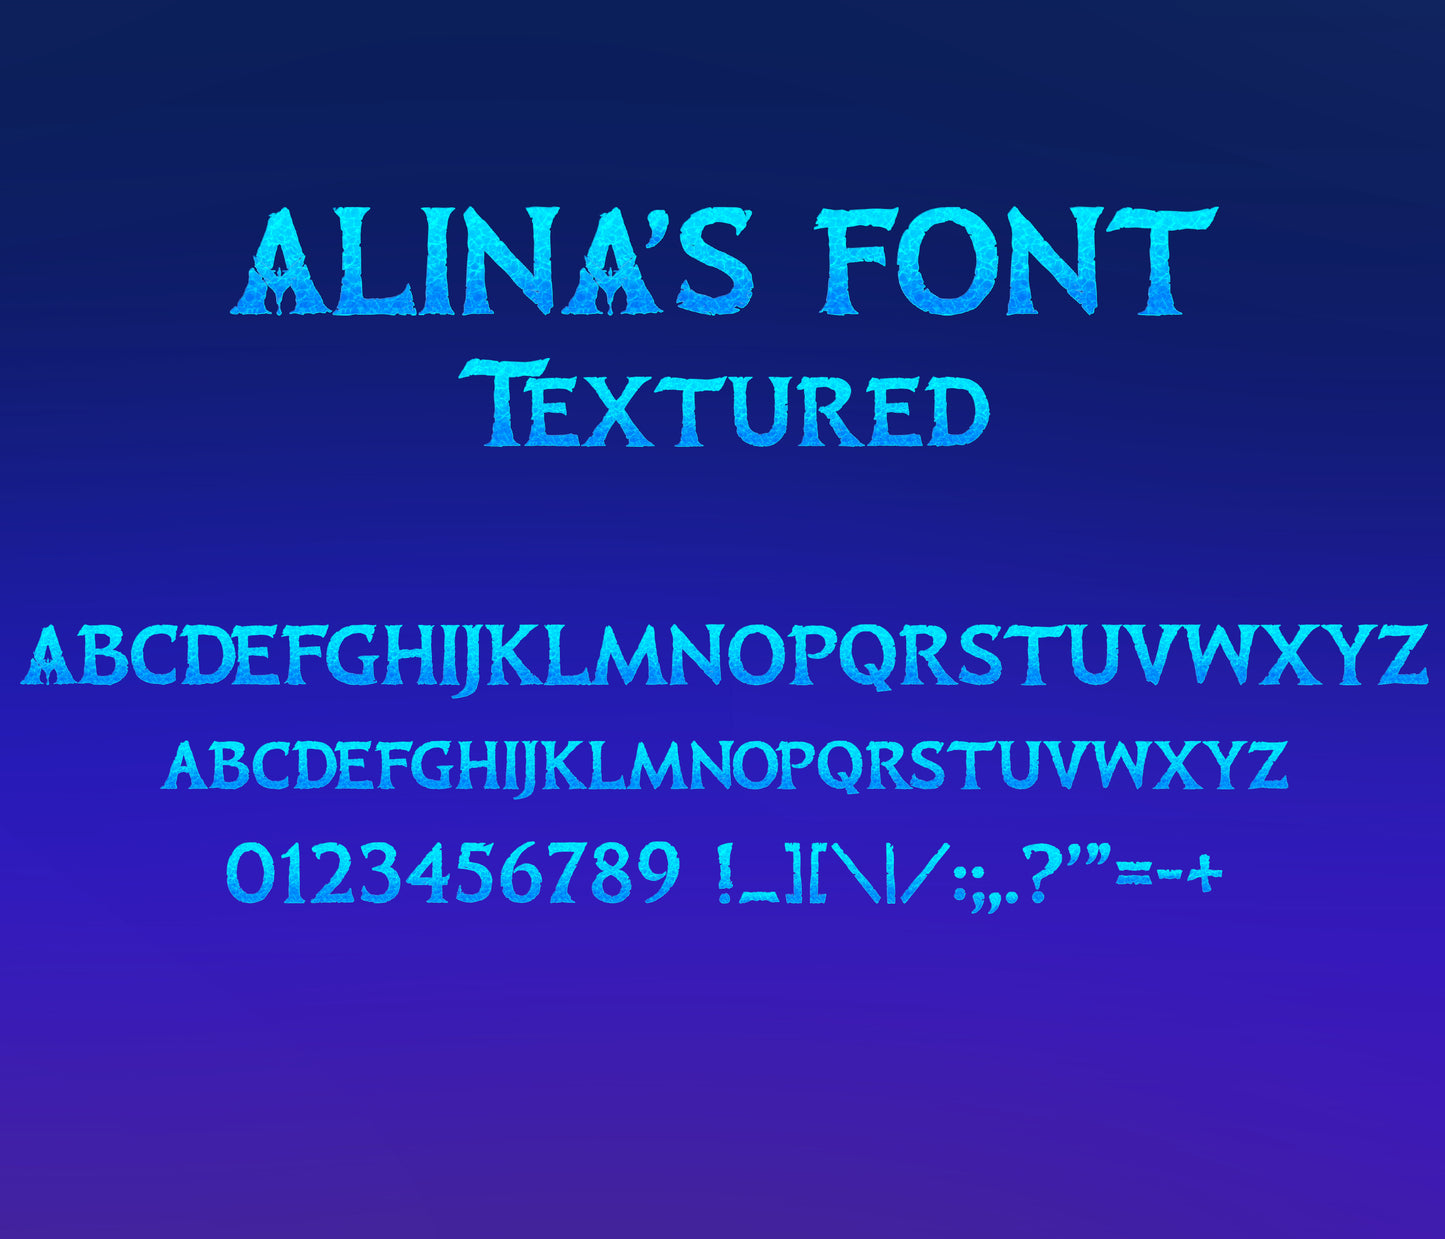 Avatar The Way Of Water Textured Font